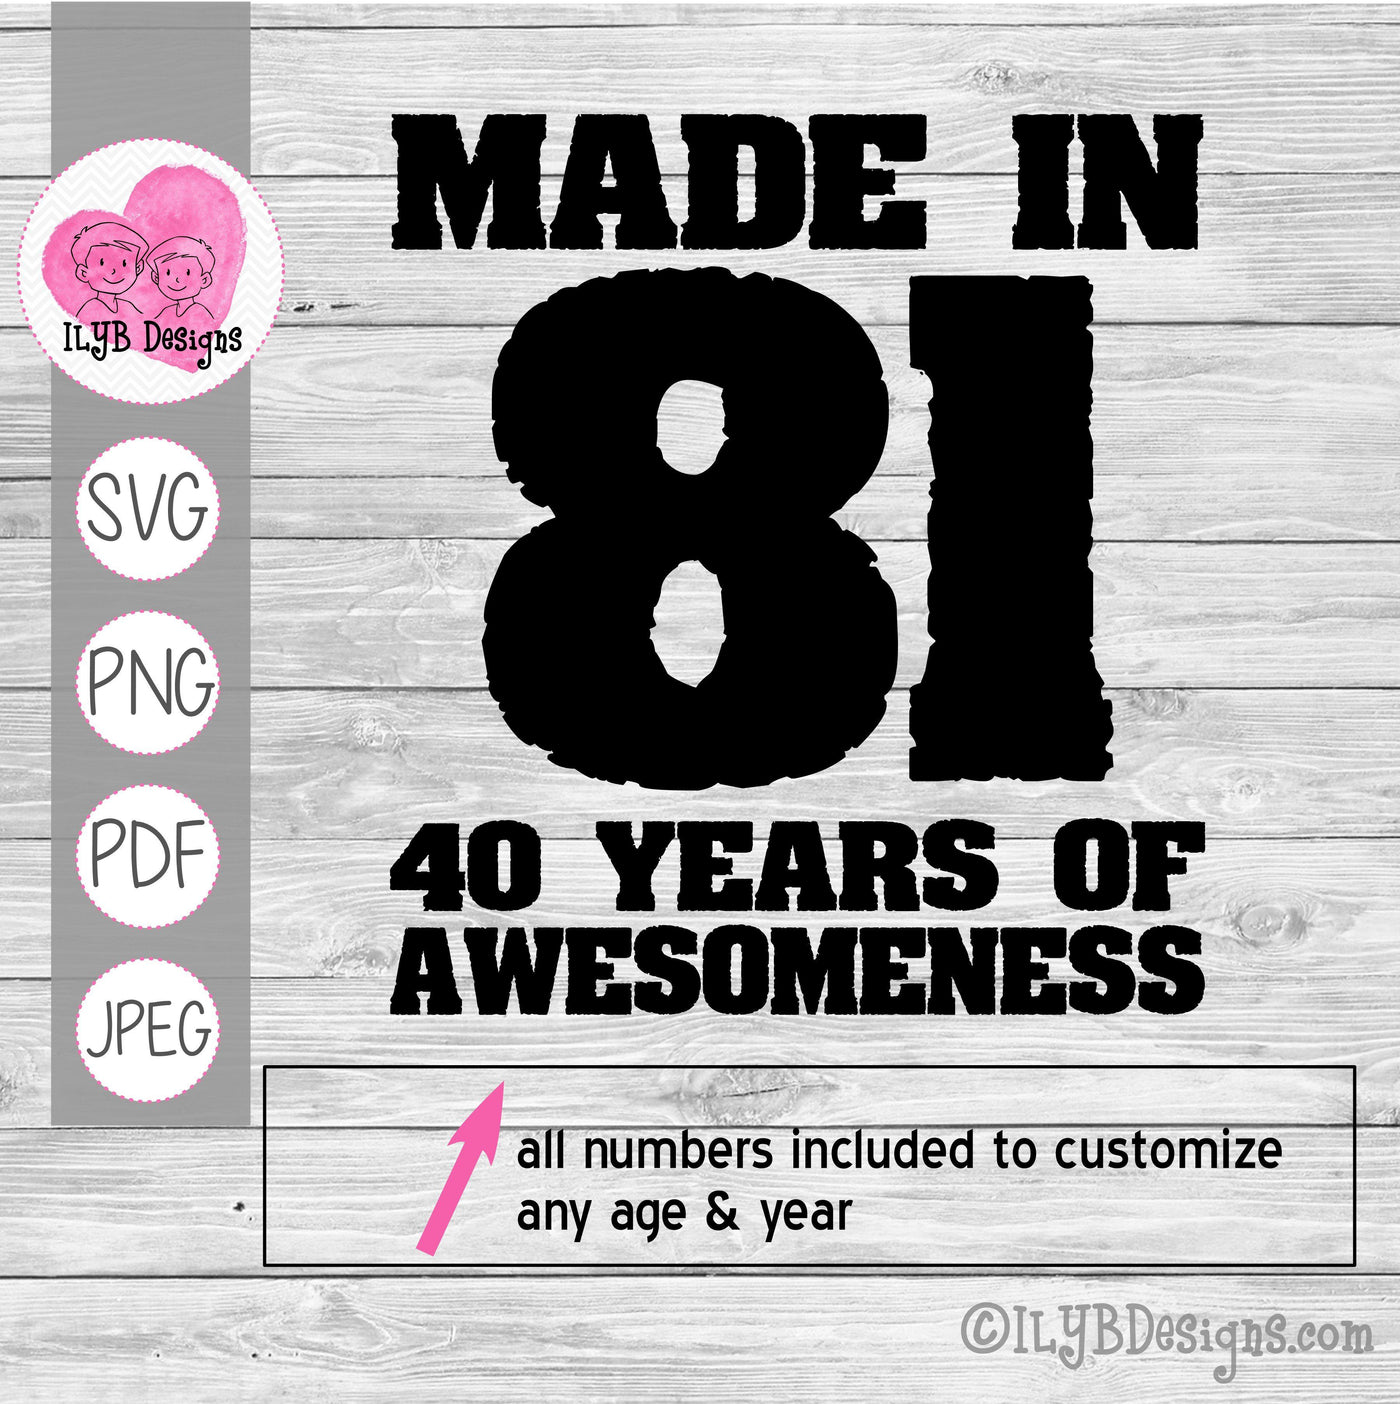 Made In 80s 40 Years of Awesomeness SVG, 40th Birthday Cut File - ILYB Designs